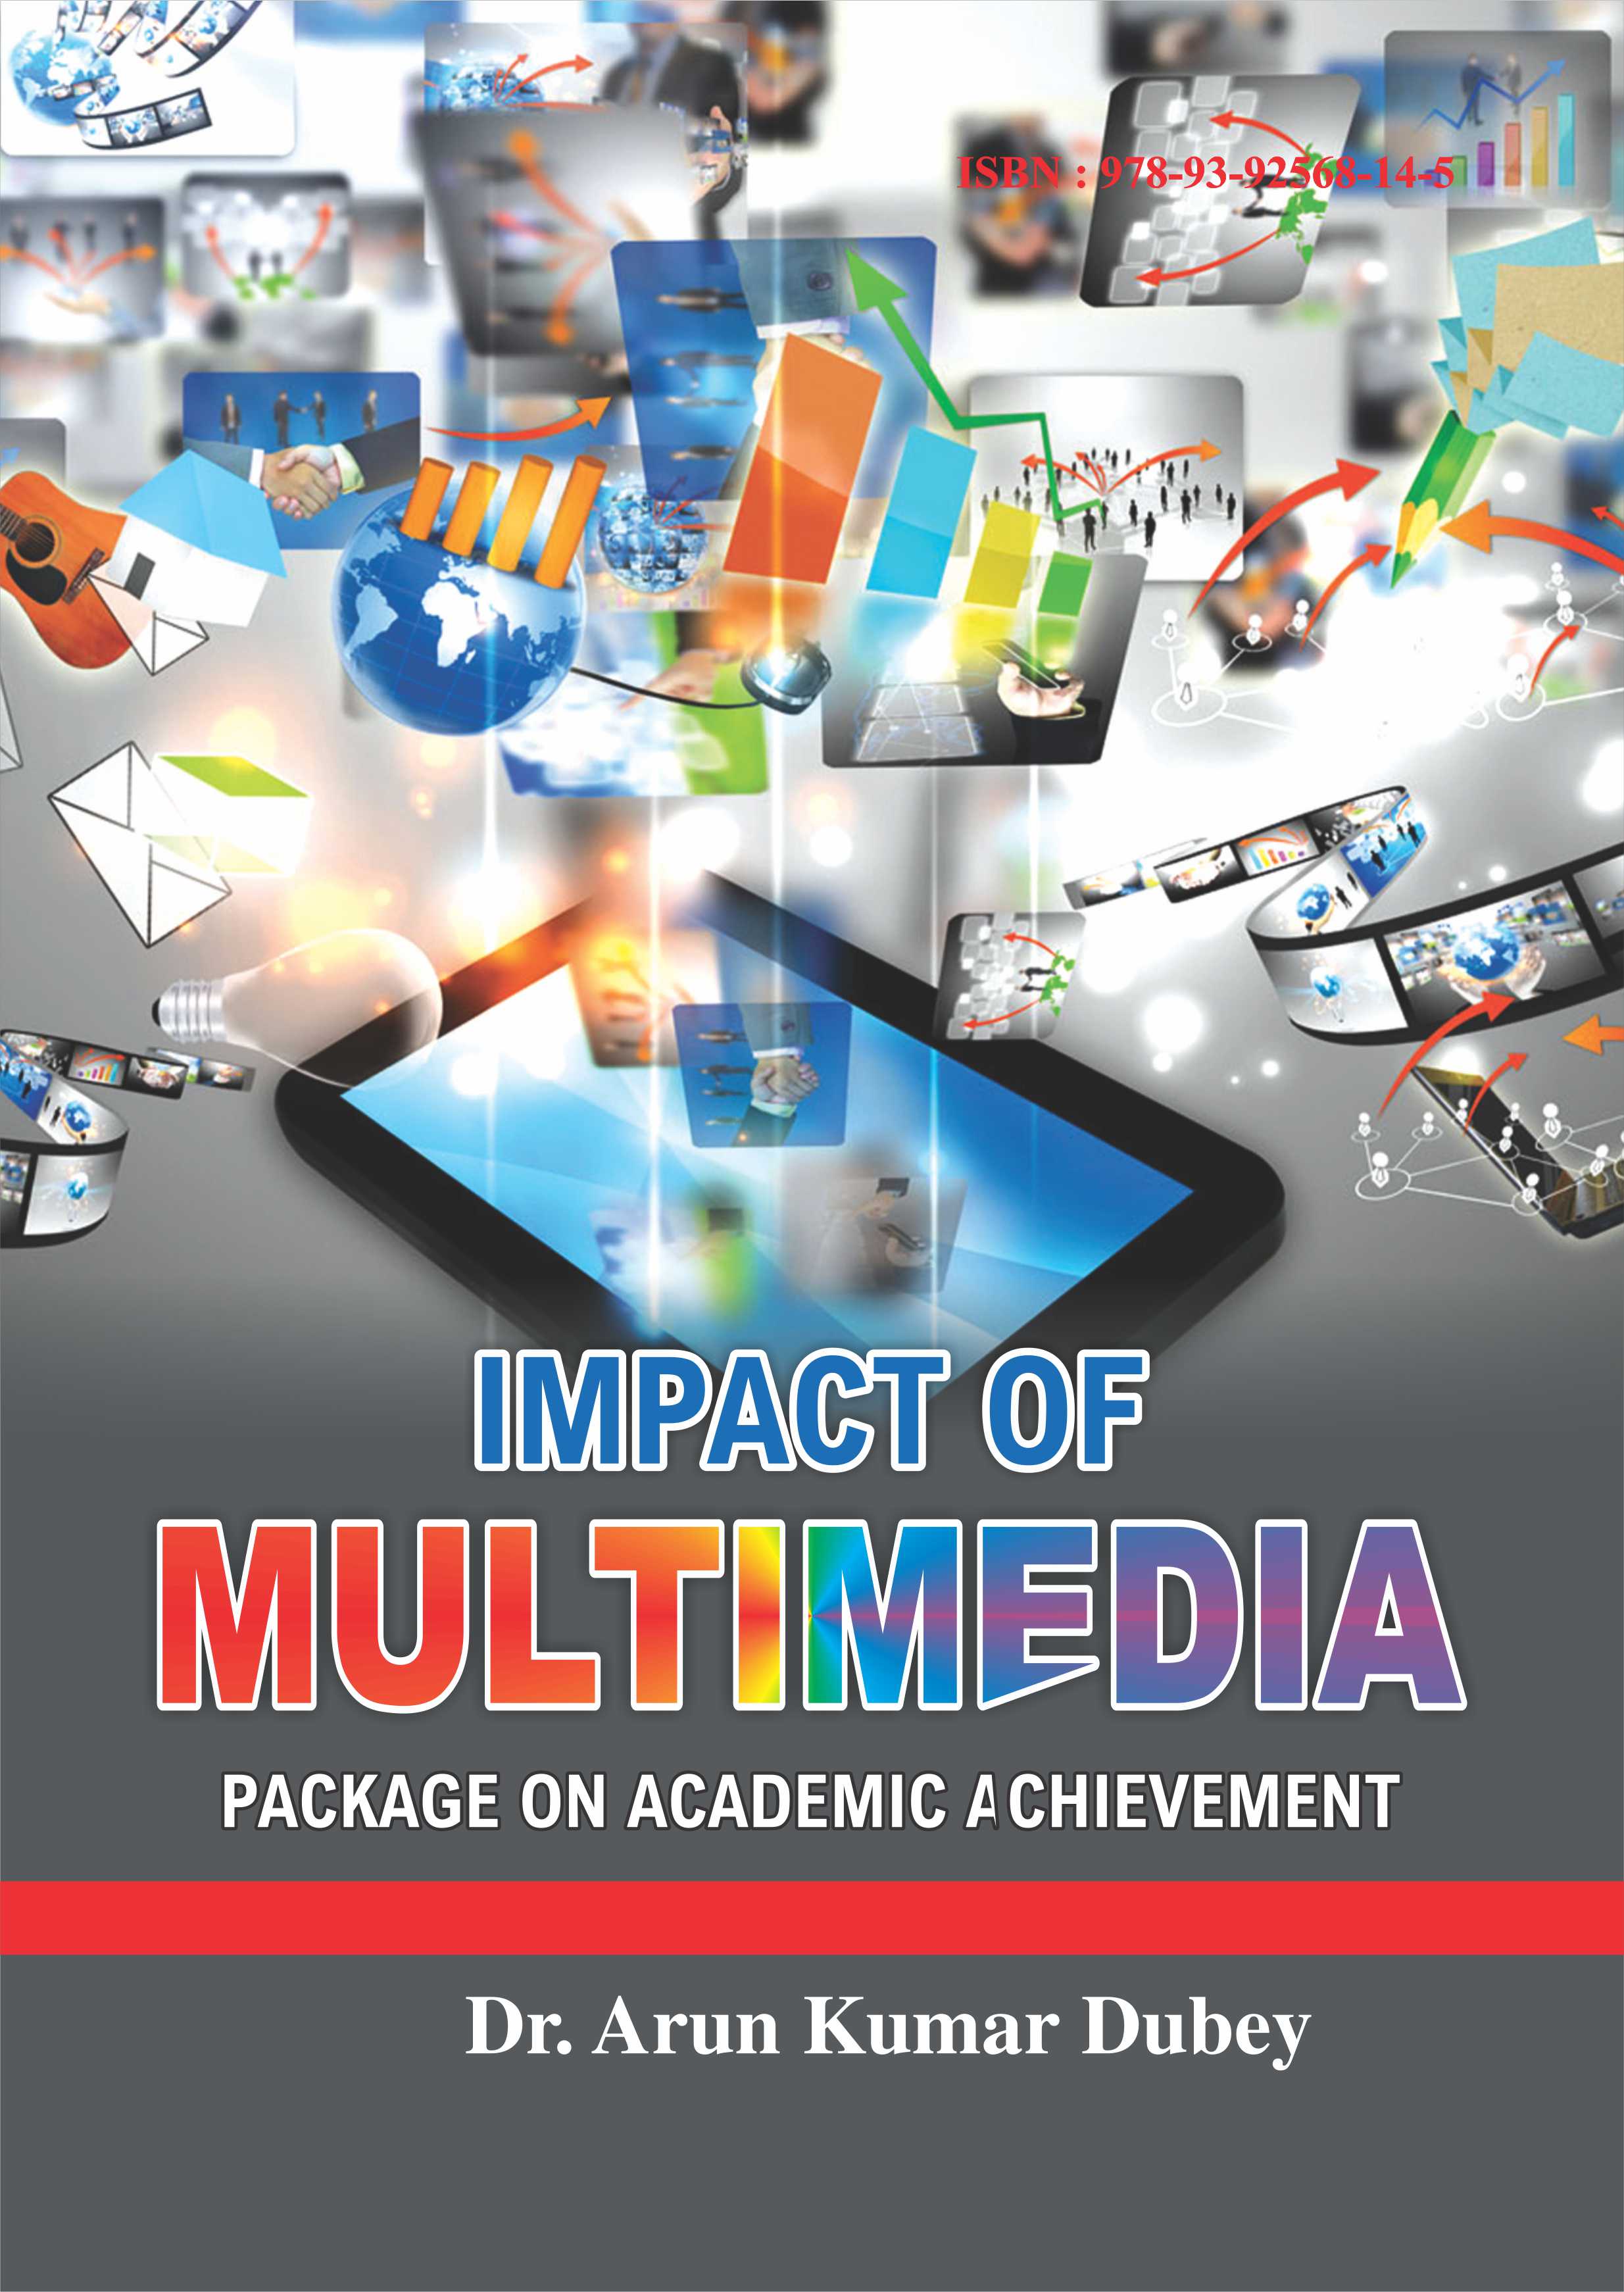 Impact of Multimedia Package on Academic Achievement